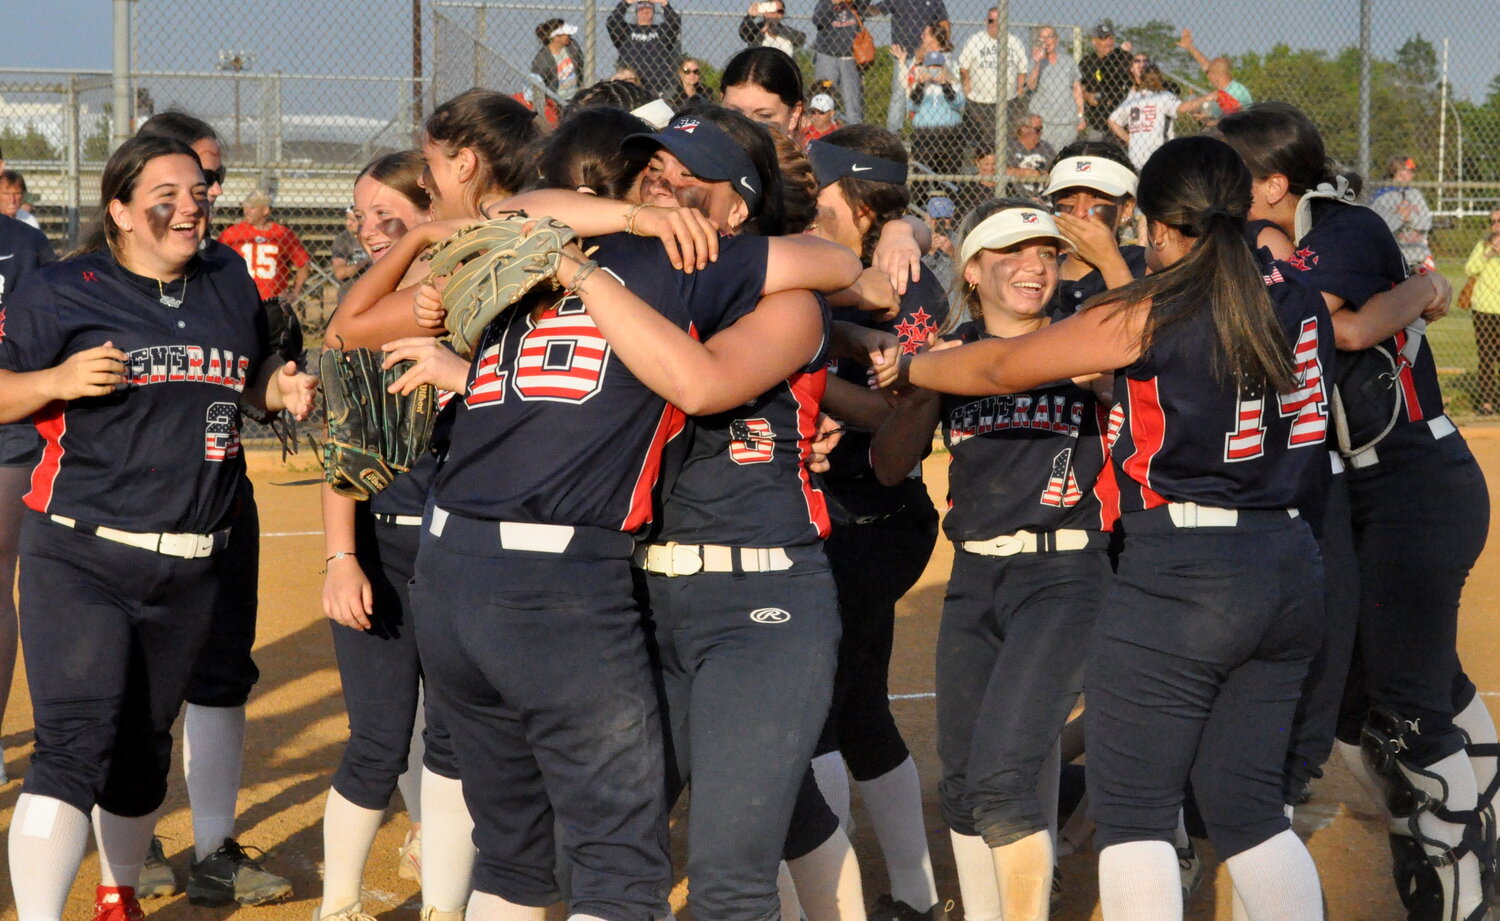 The Generals defeated Clarke in three games to capture the Nassau Class A softball championship.